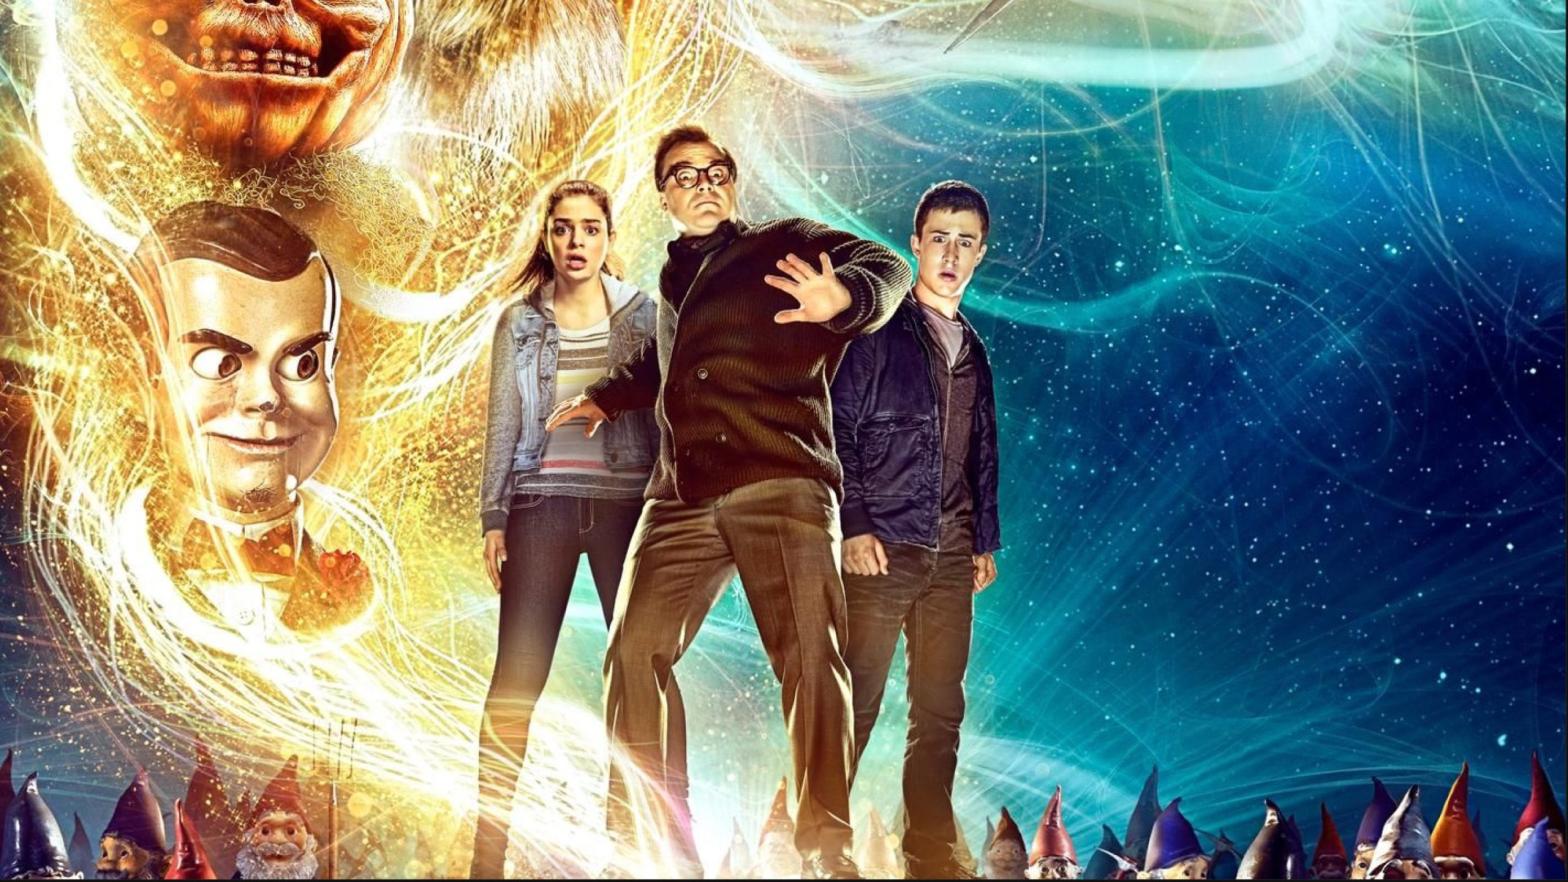 Inset of the 2015 Goosebumps movie poster. (Image: Sony Pictures)